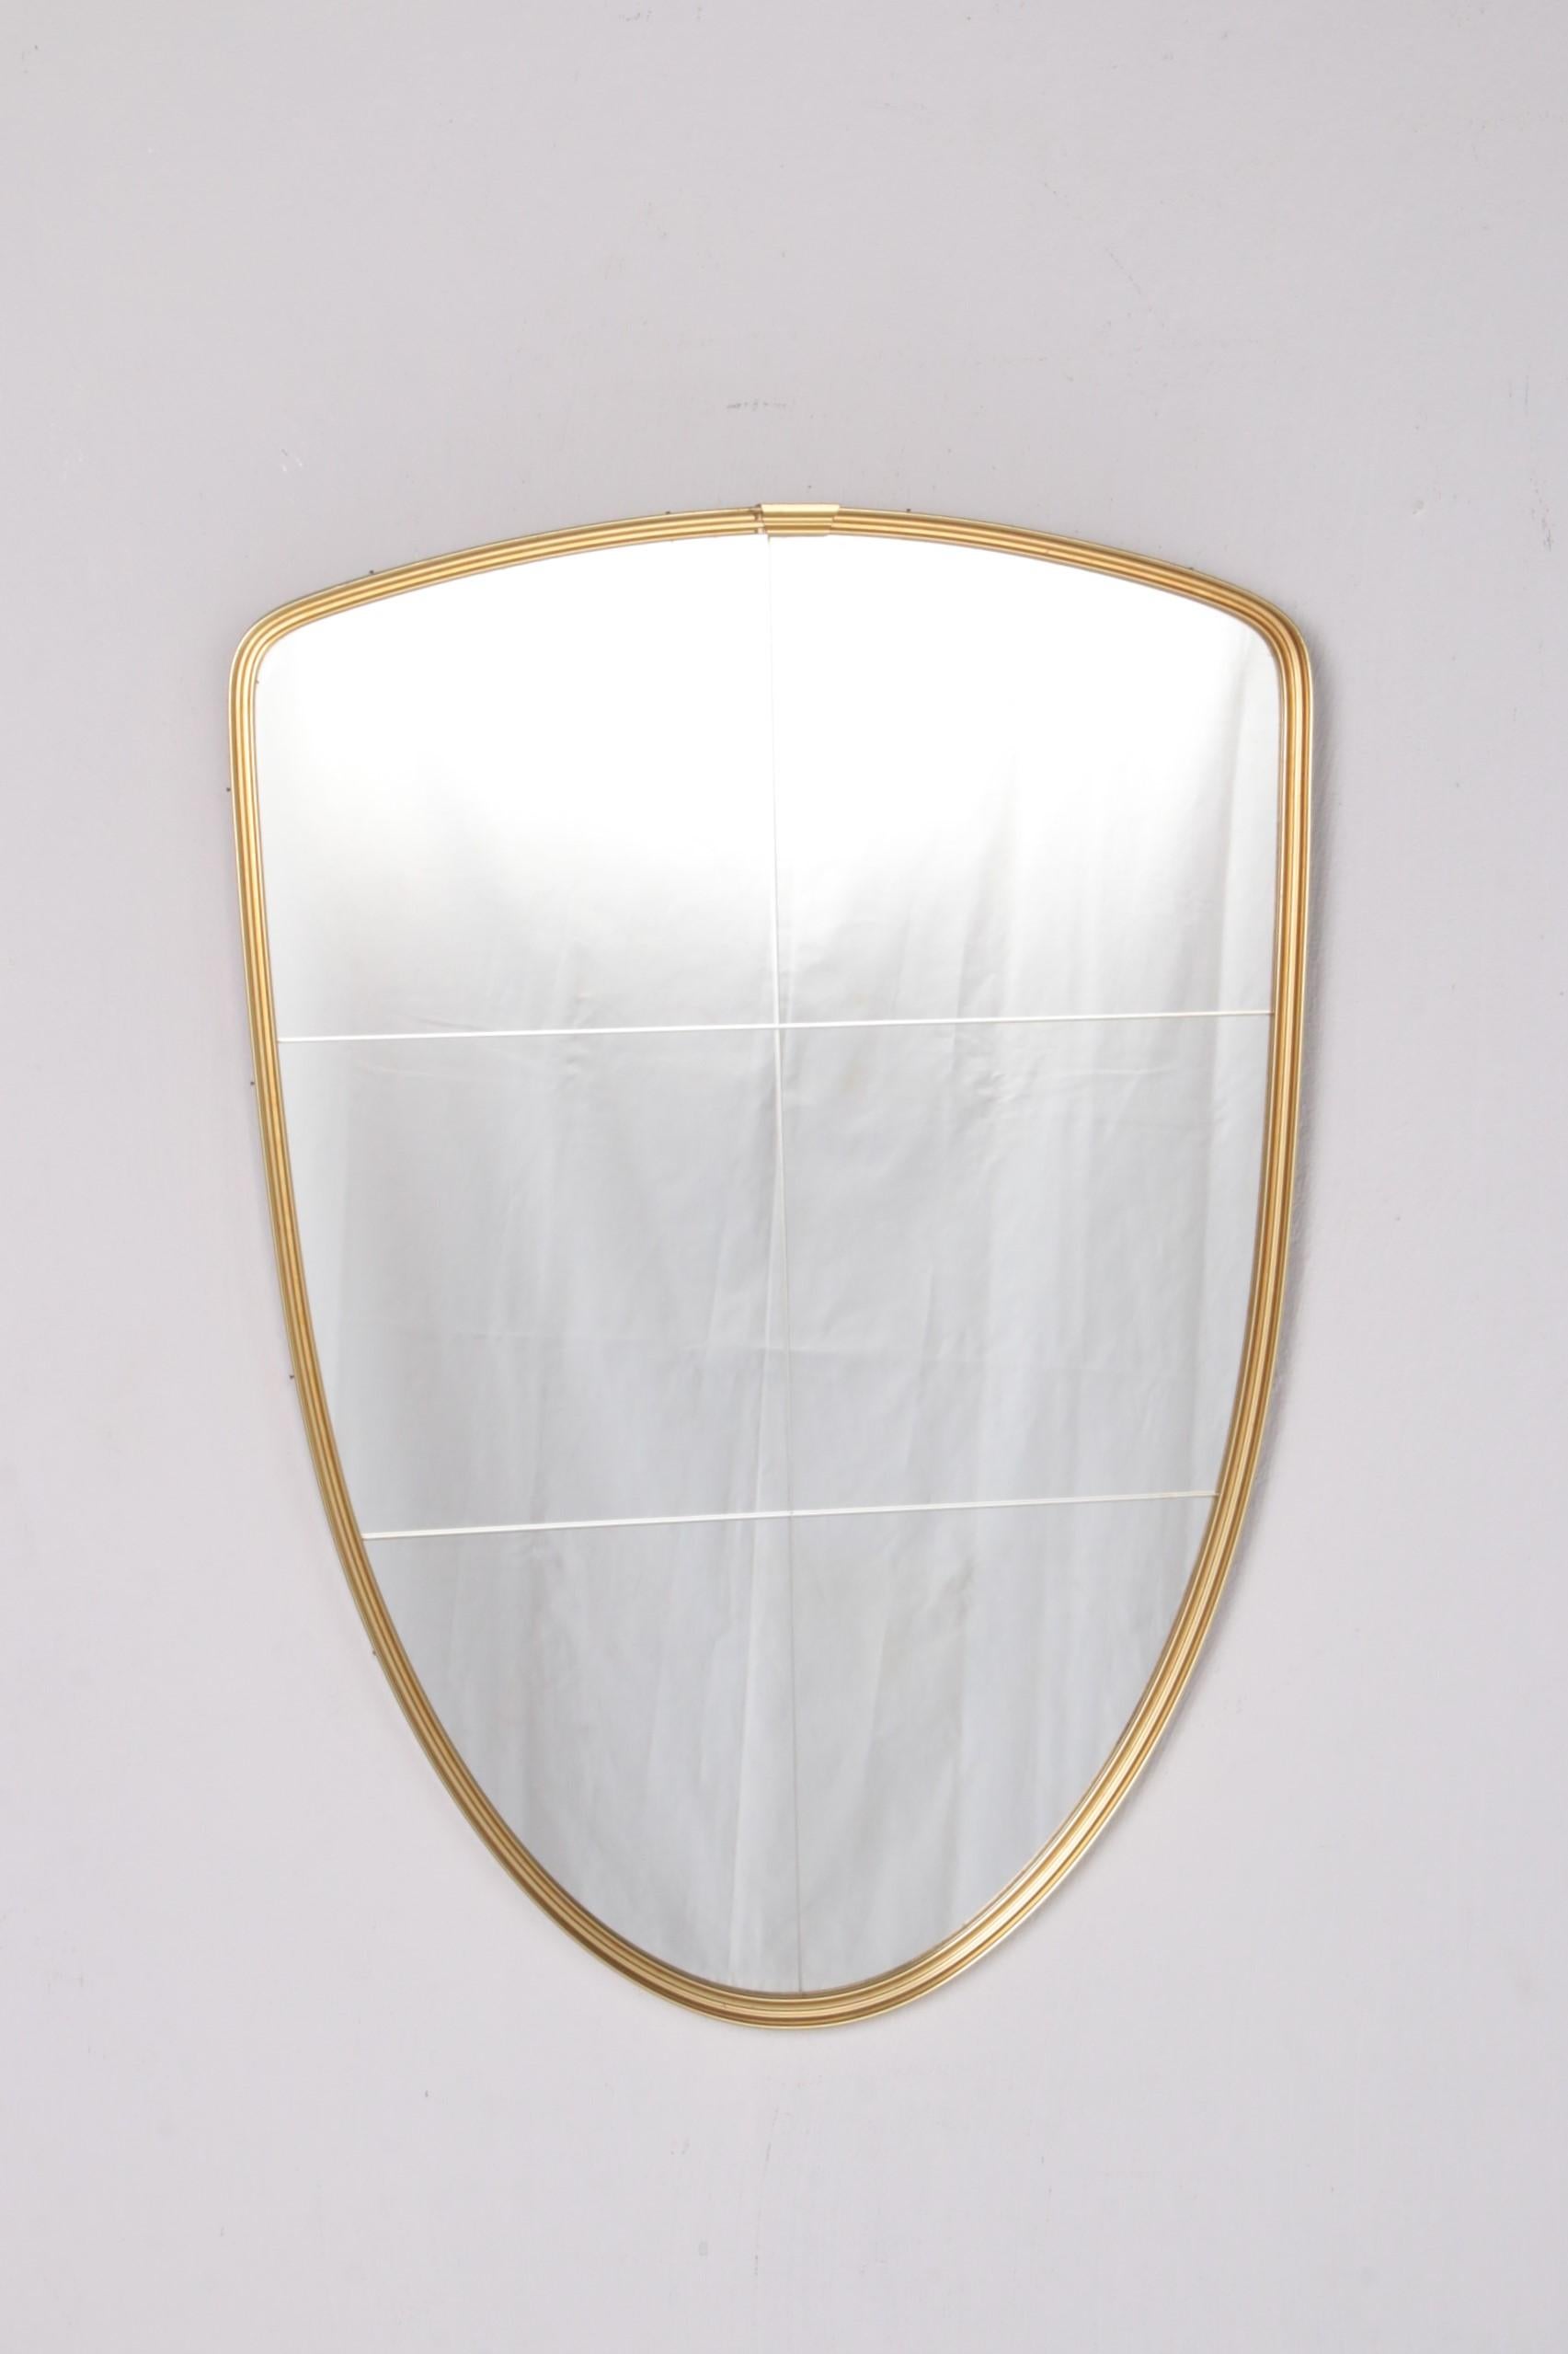 Vintage, beautiful model mirror with brass rim, 1960s Germany.

This is a beautiful vintage mirror made in the 1960s. What would this mirror have seen before, we want to know even better.

A line has been cut in the mirror, which was often done in